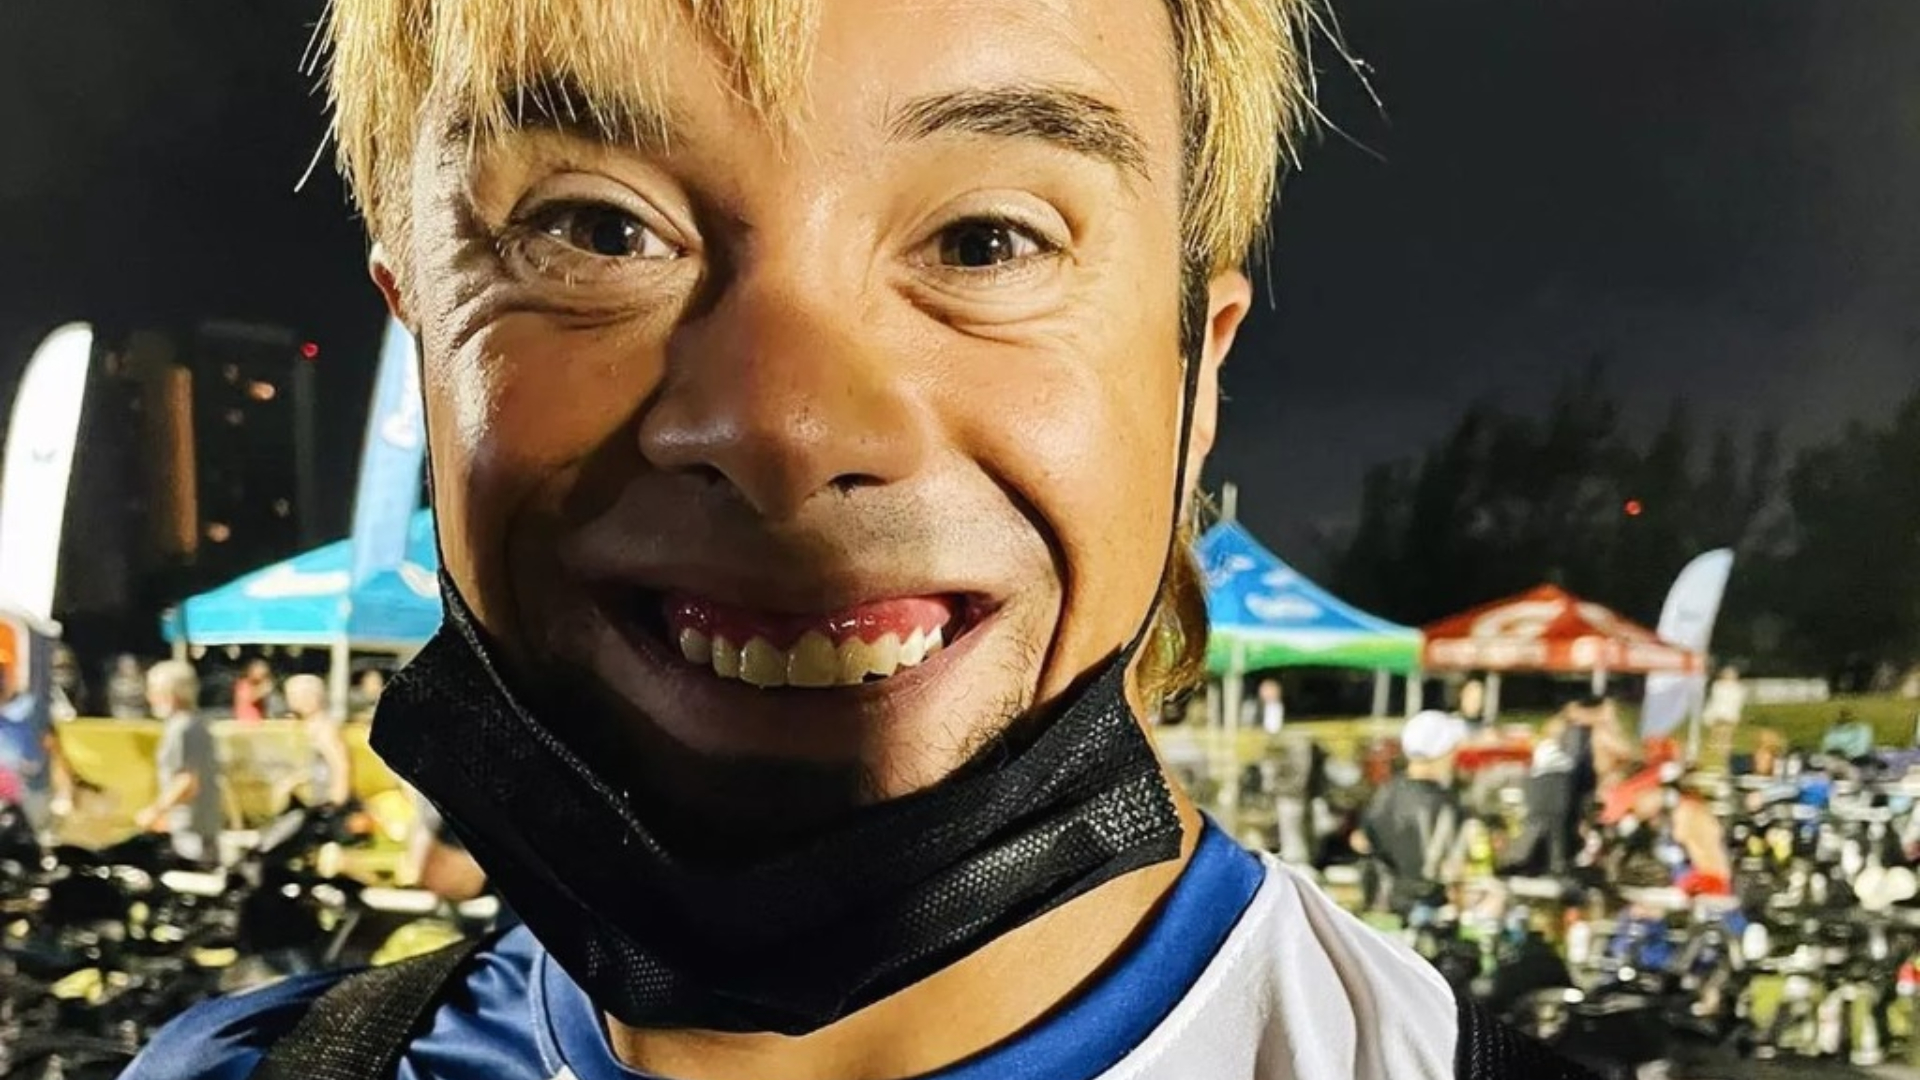 A 23-year-old Puerto Rican athlete with Down syndrome completed Iron Man